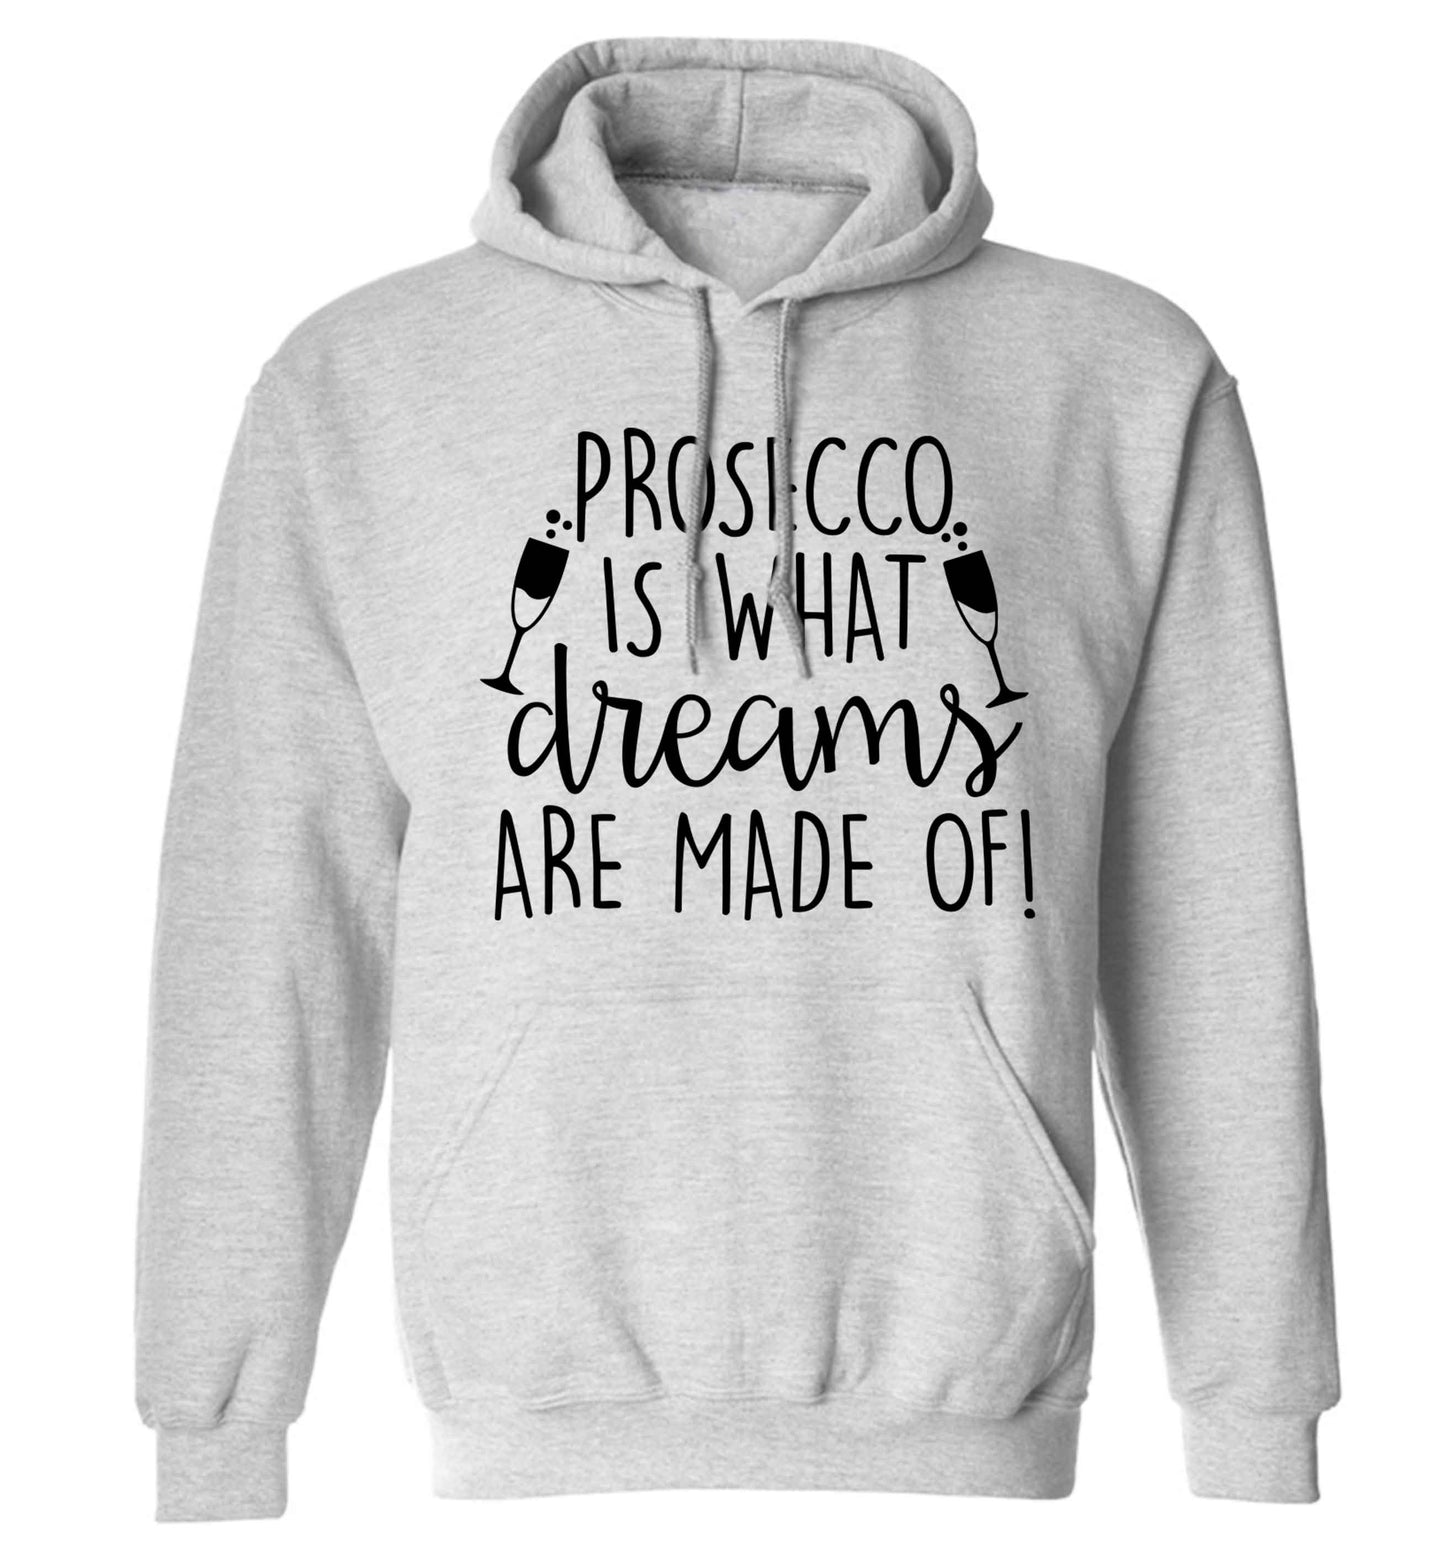 Prosecco is what dreams are made of adults unisex grey hoodie 2XL